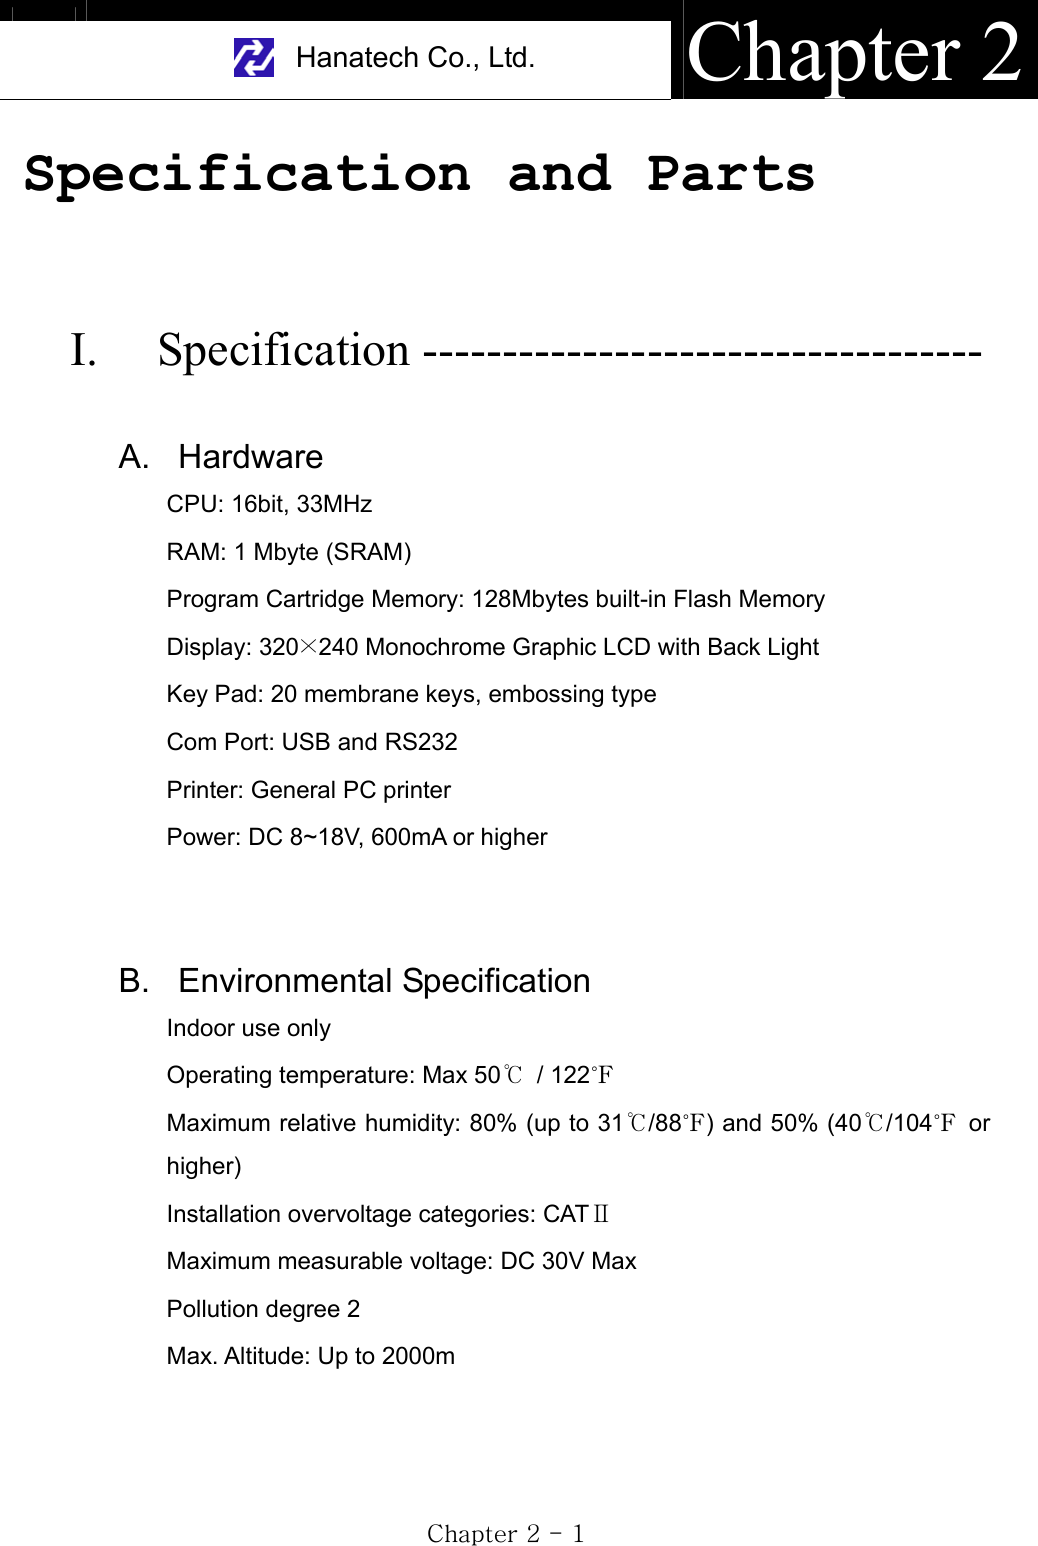 Hanatech Co., Ltd.  Chapter 2GjGYGTGXGSpecification and Parts  I. Specification ----------------------------------- A. Hardware CPU: 16bit, 33MHz RAM: 1 Mbyte (SRAM) Program Cartridge Memory: 128Mbytes built-in Flash Memory Display: 320Ý240 Monochrome Graphic LCD with Back Light Key Pad: 20 membrane keys, embossing type Com Port: USB and RS232   Printer: General PC printer Power: DC 8~18V, 600mA or higher B. Environmental Specification Indoor use only Operating temperature: Max 50ଇ / 122൓Maximum relative humidity: 80% (up to 31ଇ/88൓) and 50% (40ଇ/104൓ or higher) Installation overvoltage categories: CATซMaximum measurable voltage: DC 30V Max Pollution degree 2 Max. Altitude: Up to 2000m 